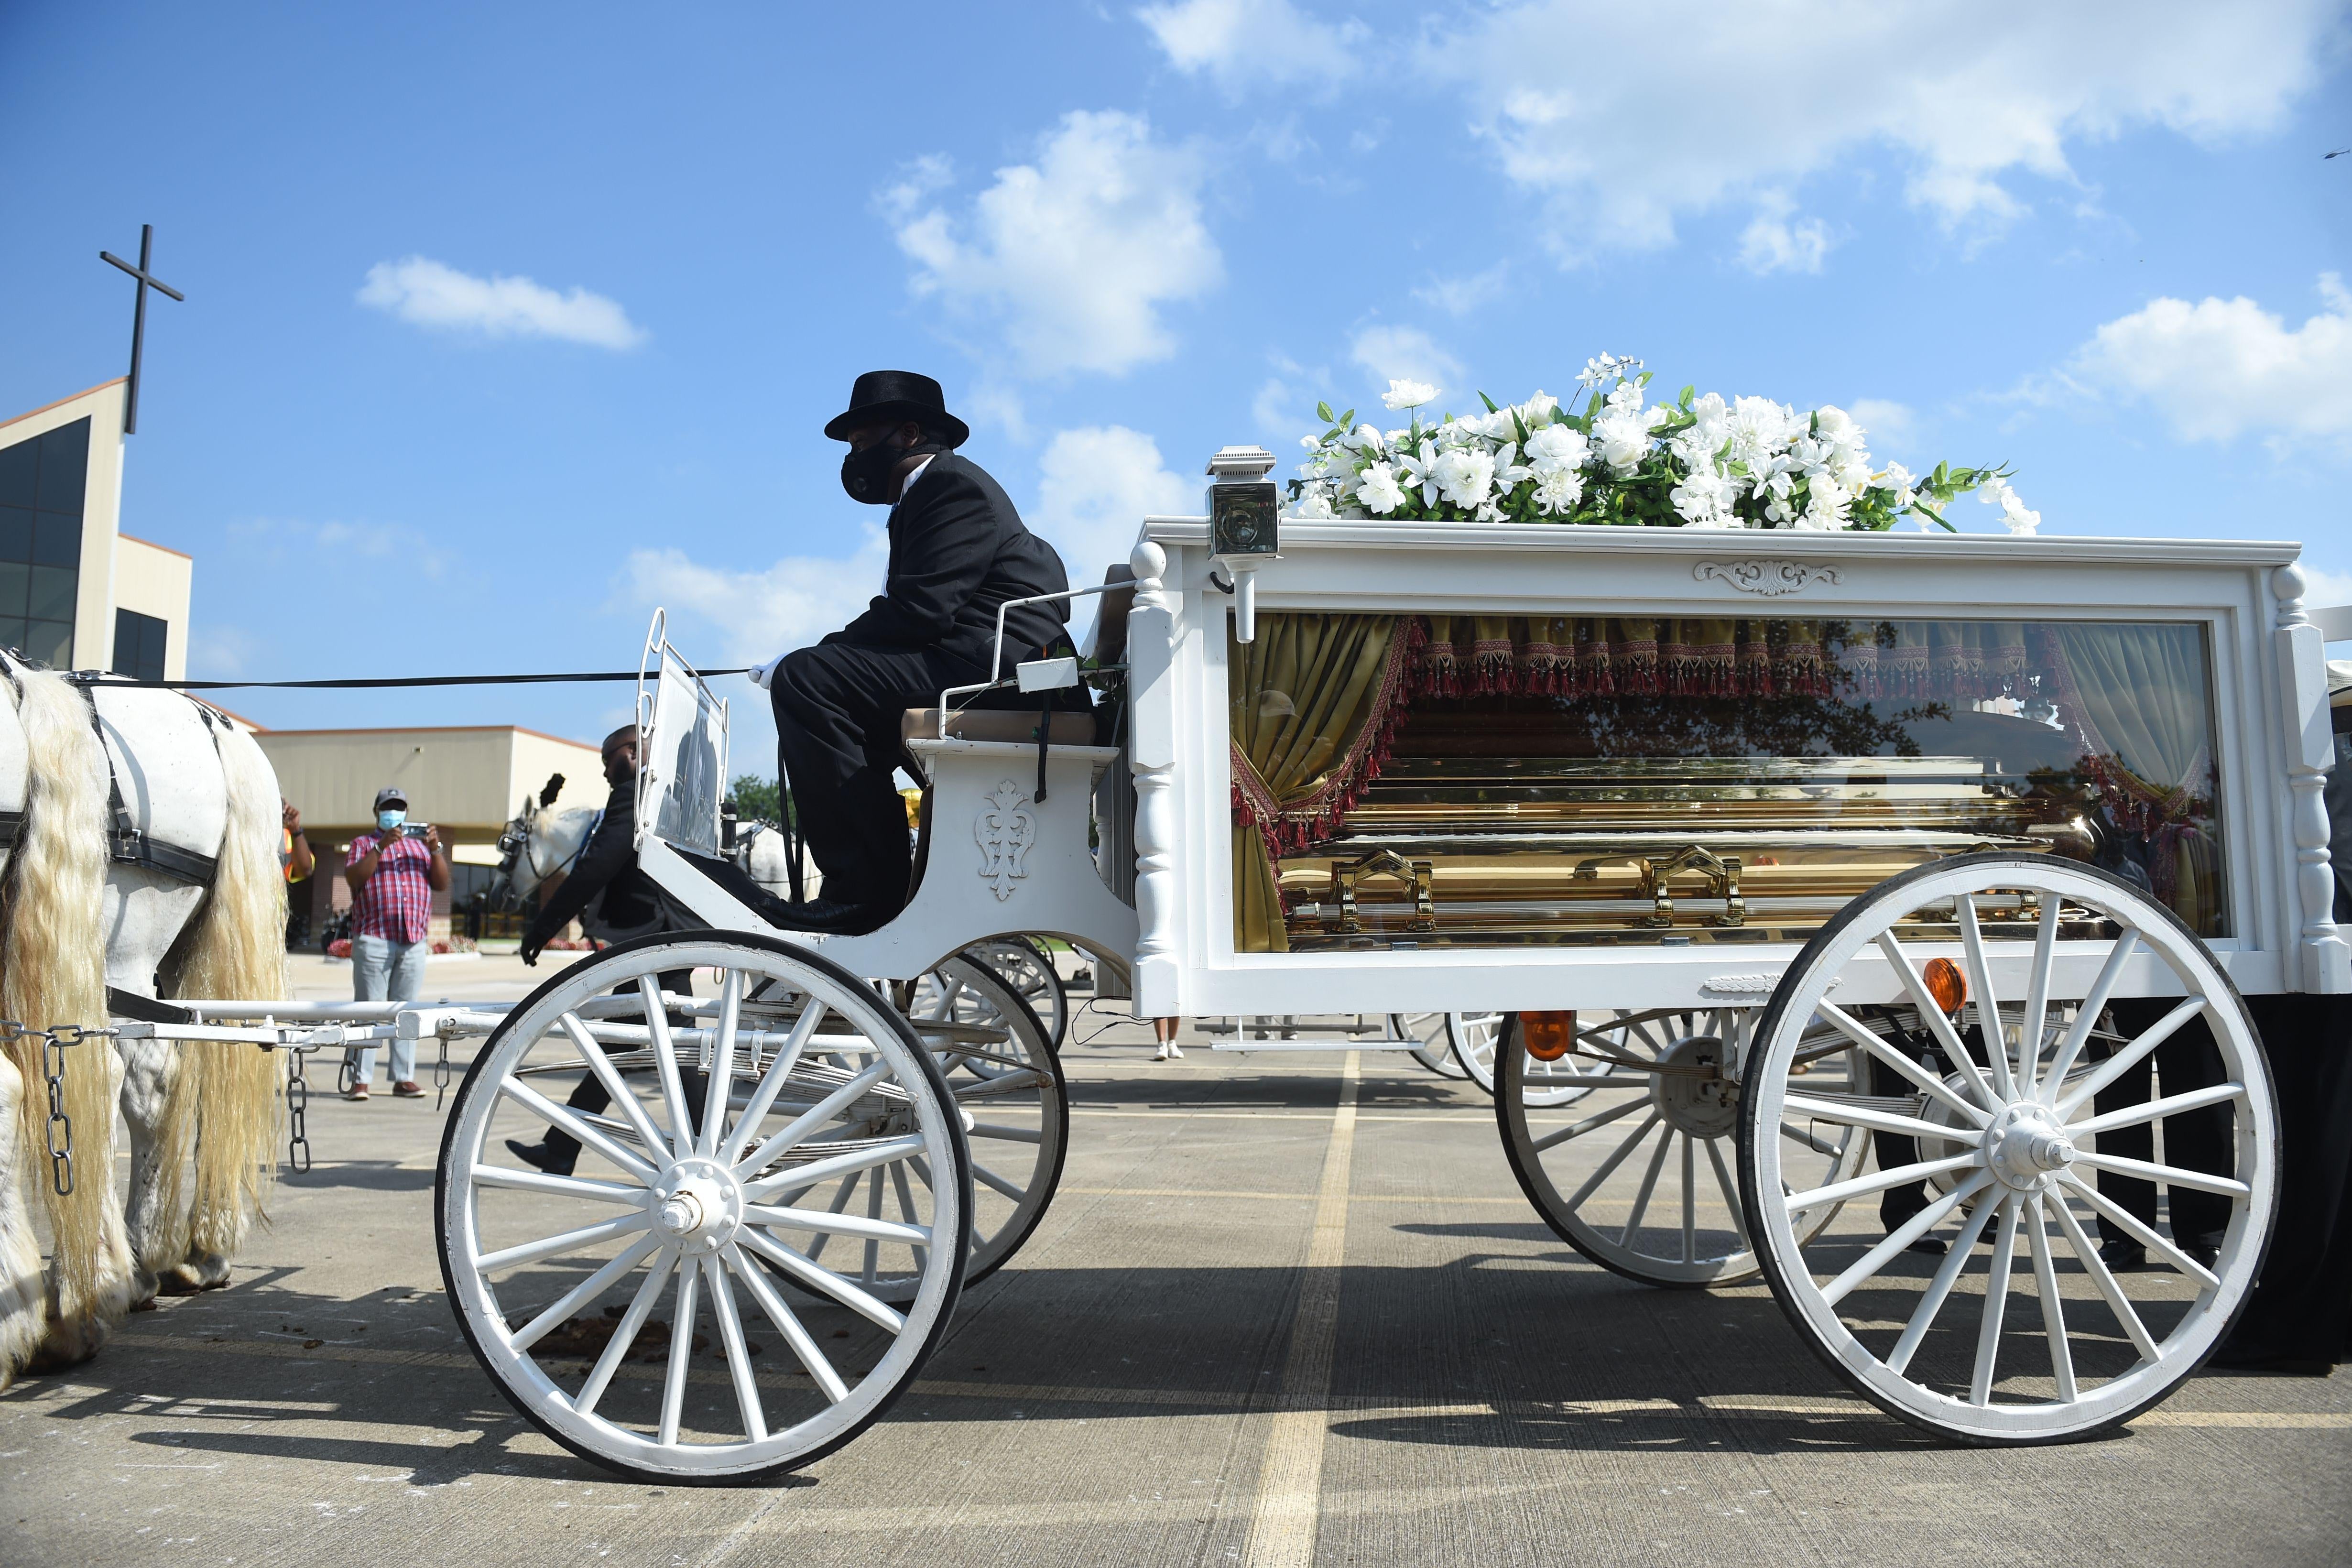 A horse and buggy carry a glass box holding the casket of George Floyd.